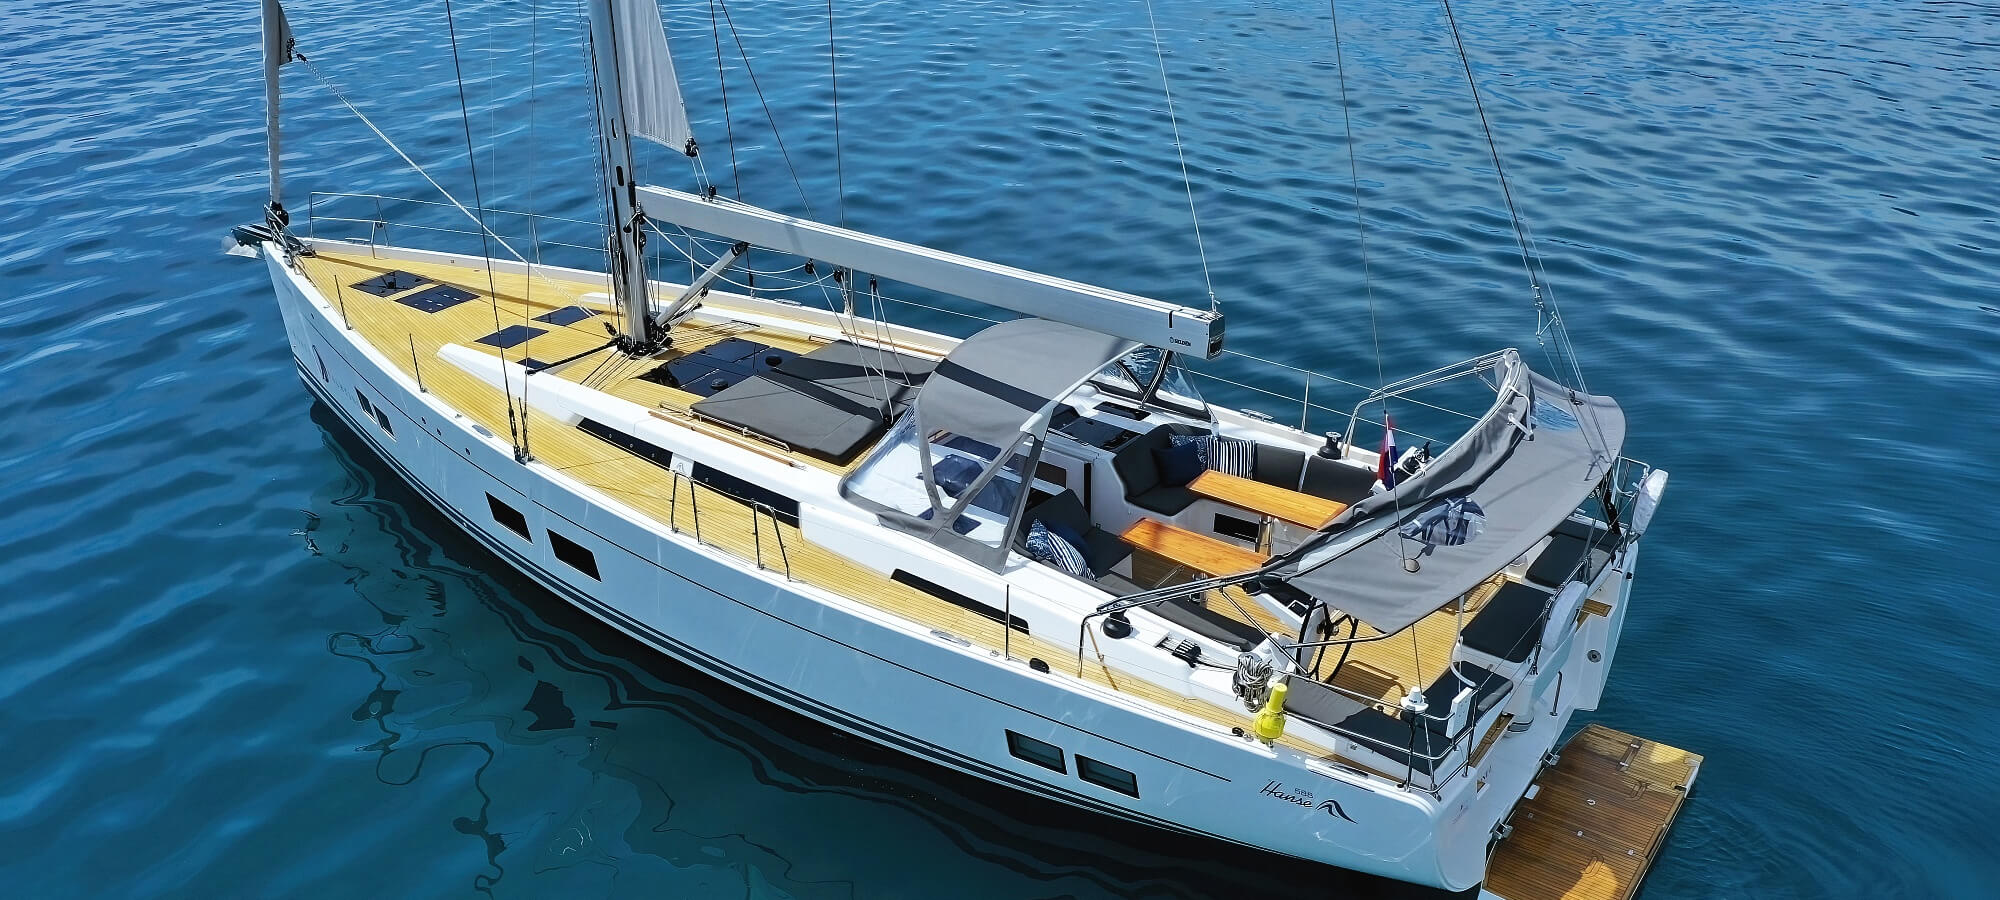 Hanse 588: Your Elegant, Dynamic, and Easy Choice for Adriatic Sailing